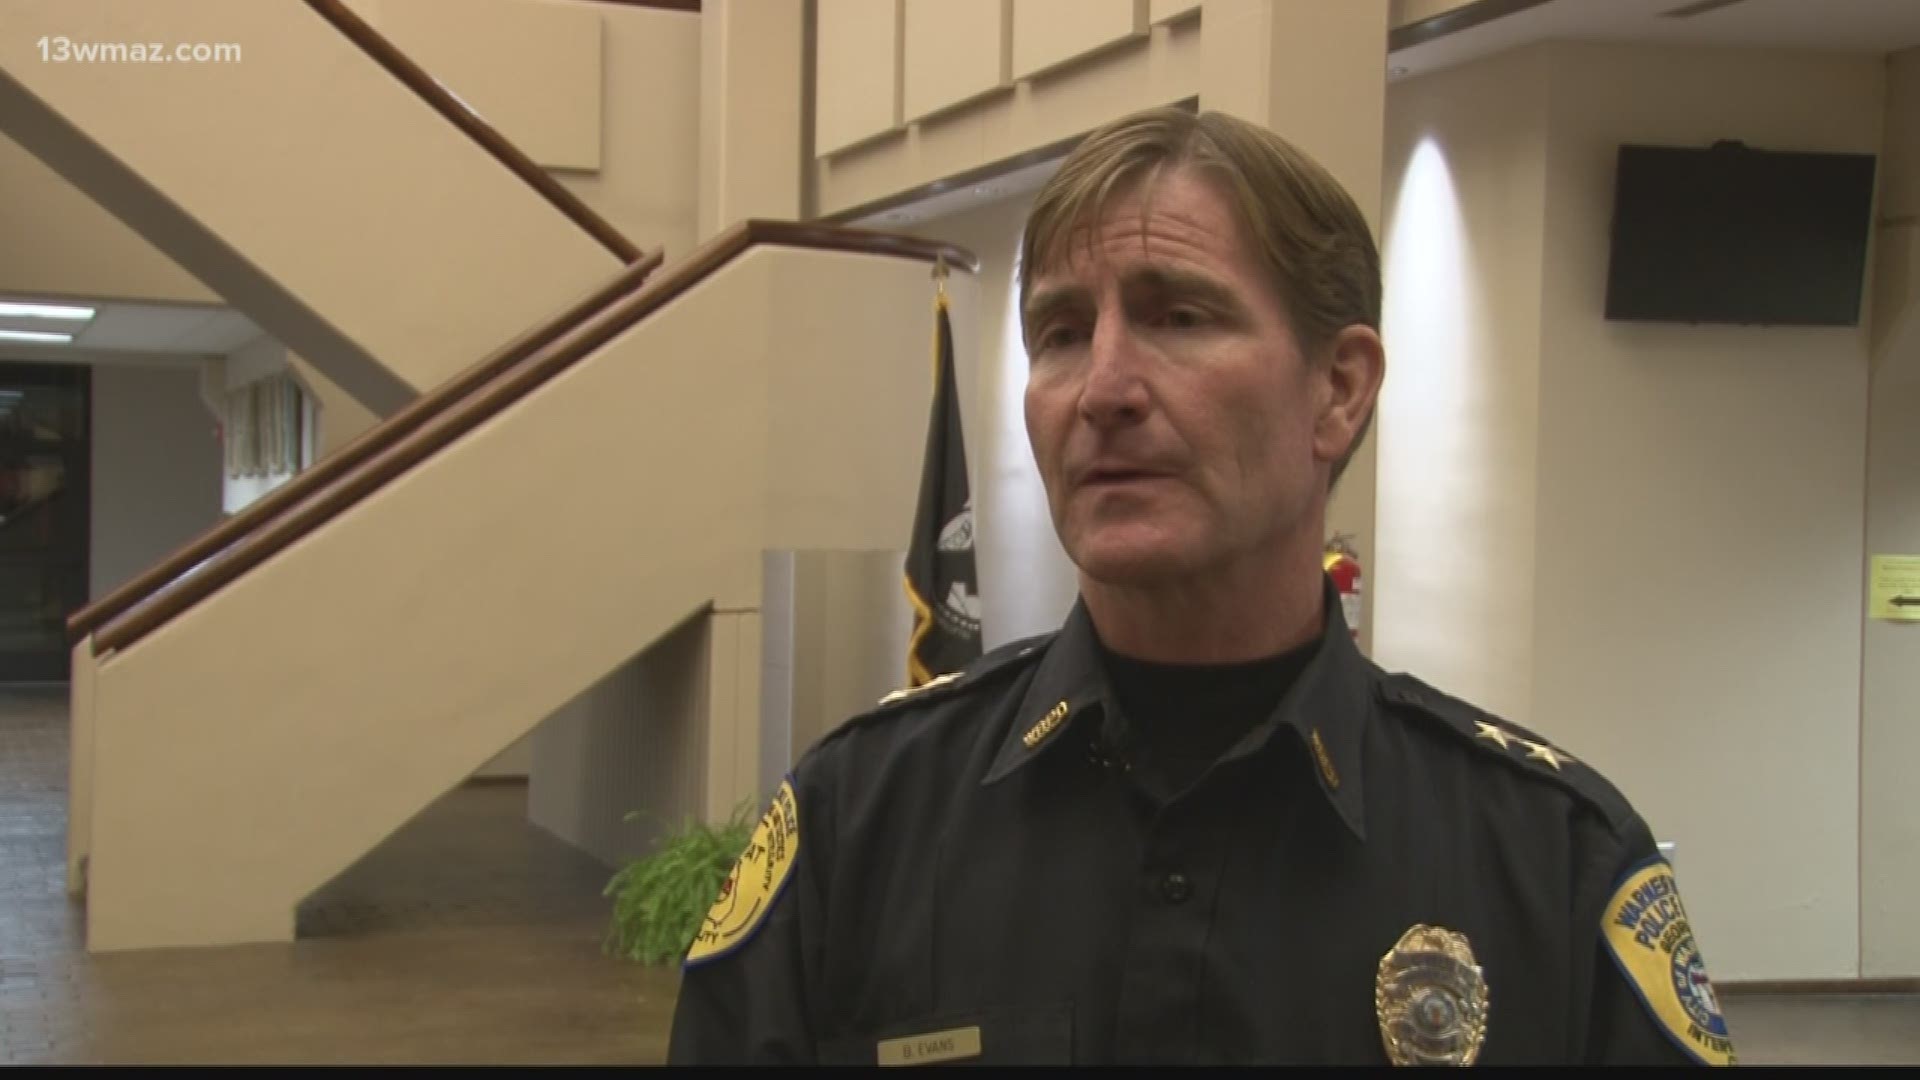 Chief Brett Evans confirmed his retirement on Monday night, through text. Warner Robins Councilman Tim Thomas says Evans is set to retire on April 19th of this year, and goes on administrative leave on Tuesday.